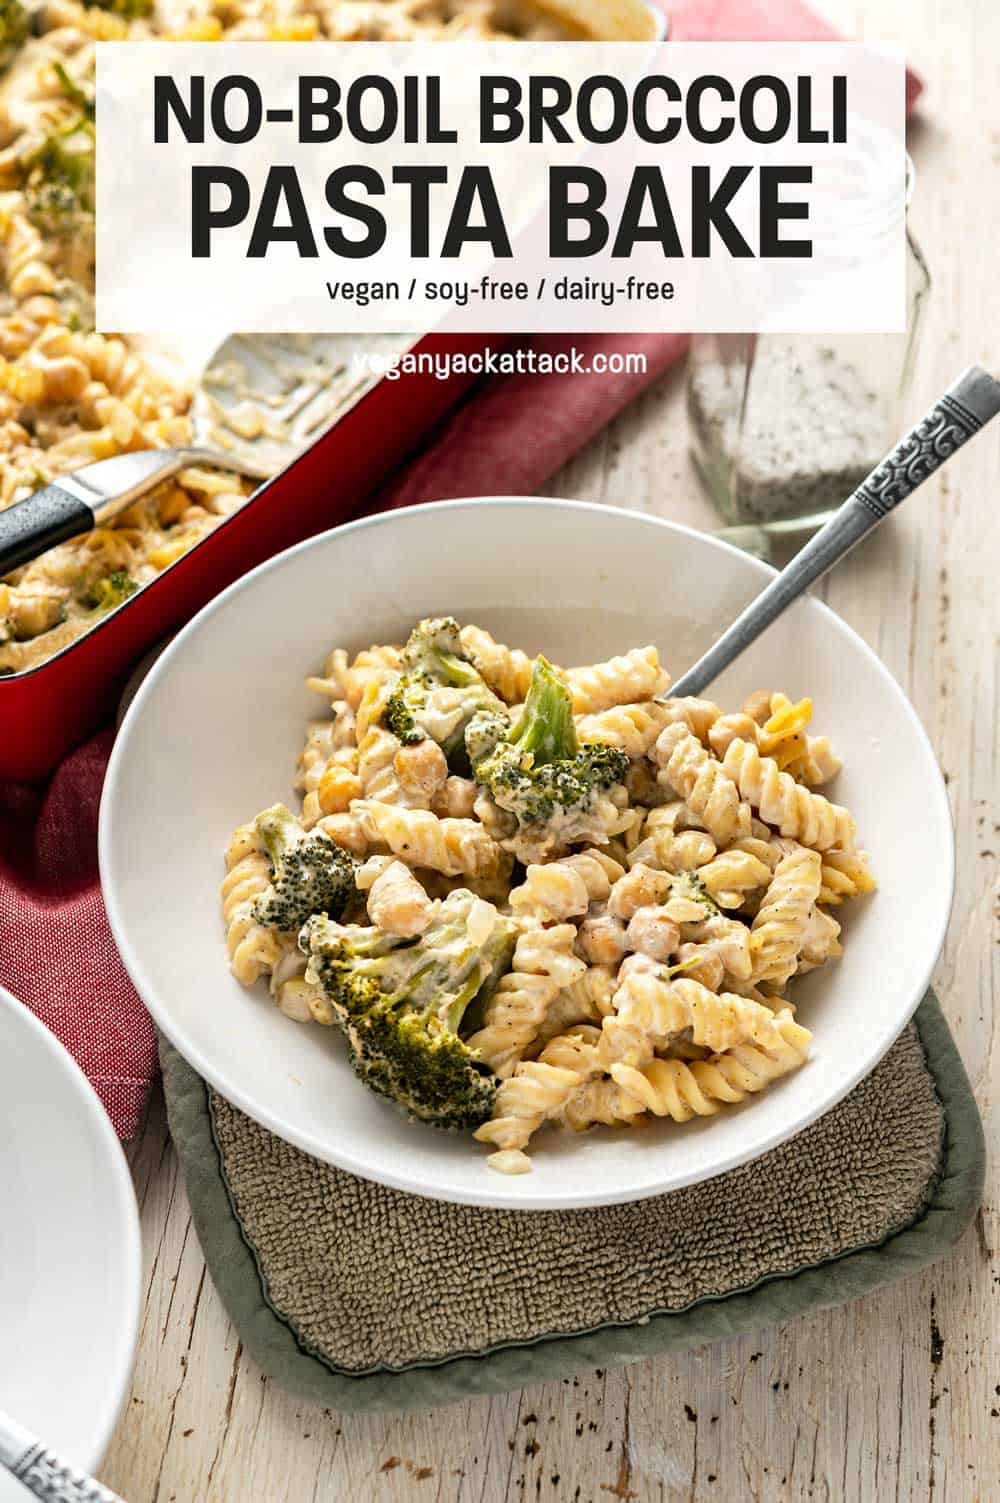 Bowl of No-Boil Broccoli Pasta Bake next to a casserole dish, with text overlay